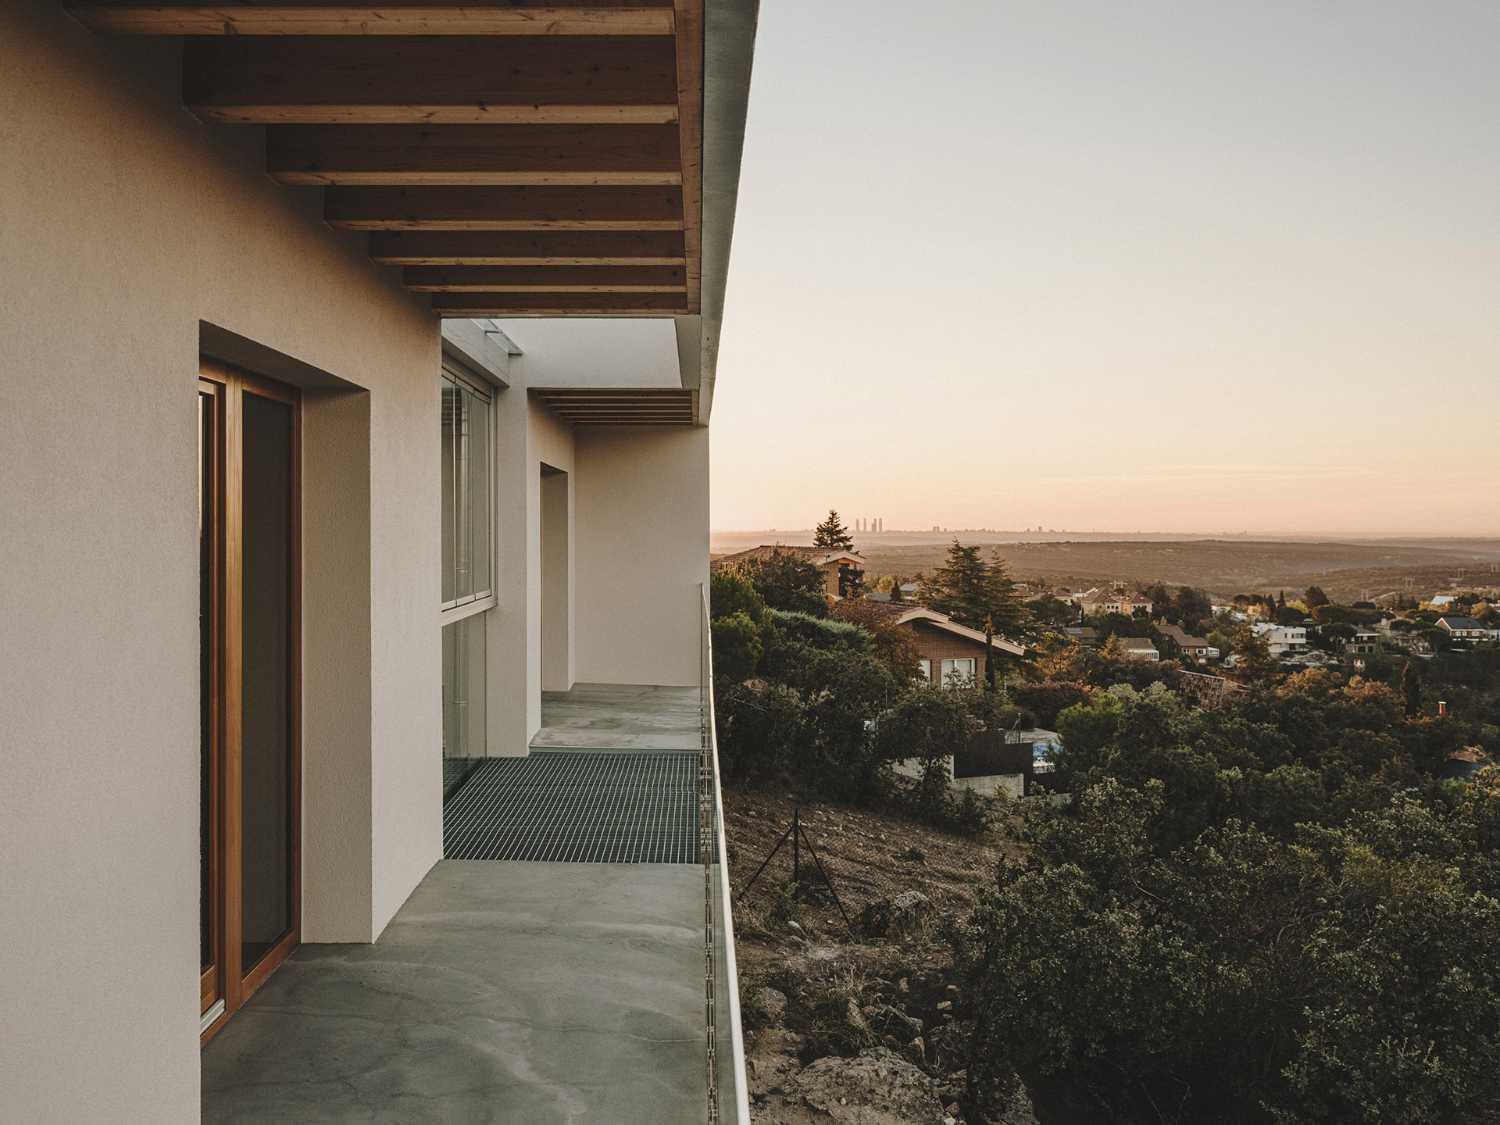 A passive class house in Monte El Pardo. Bioclimatic strategies with breathtaking views